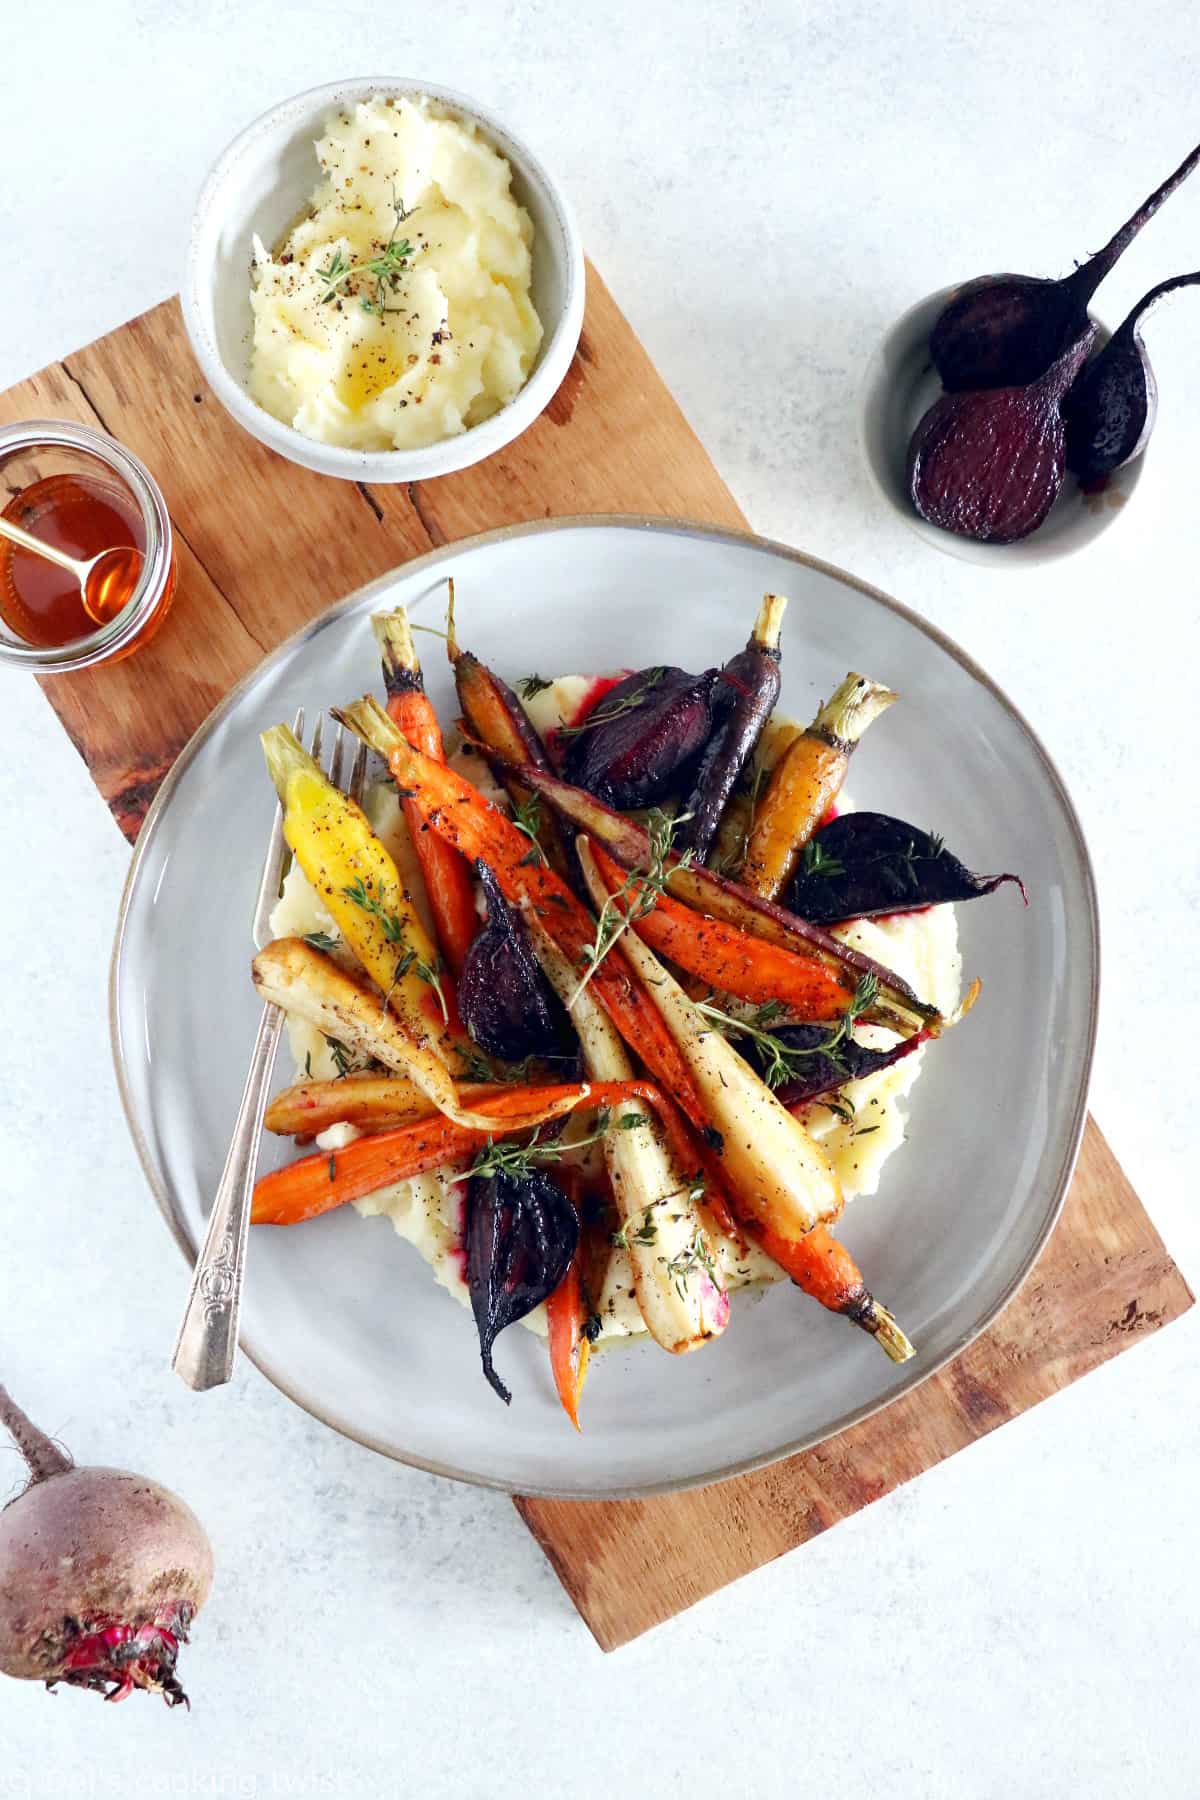 Maple roasted root vegetables with parsnip puree make an easy side dish for these chilly days out there.